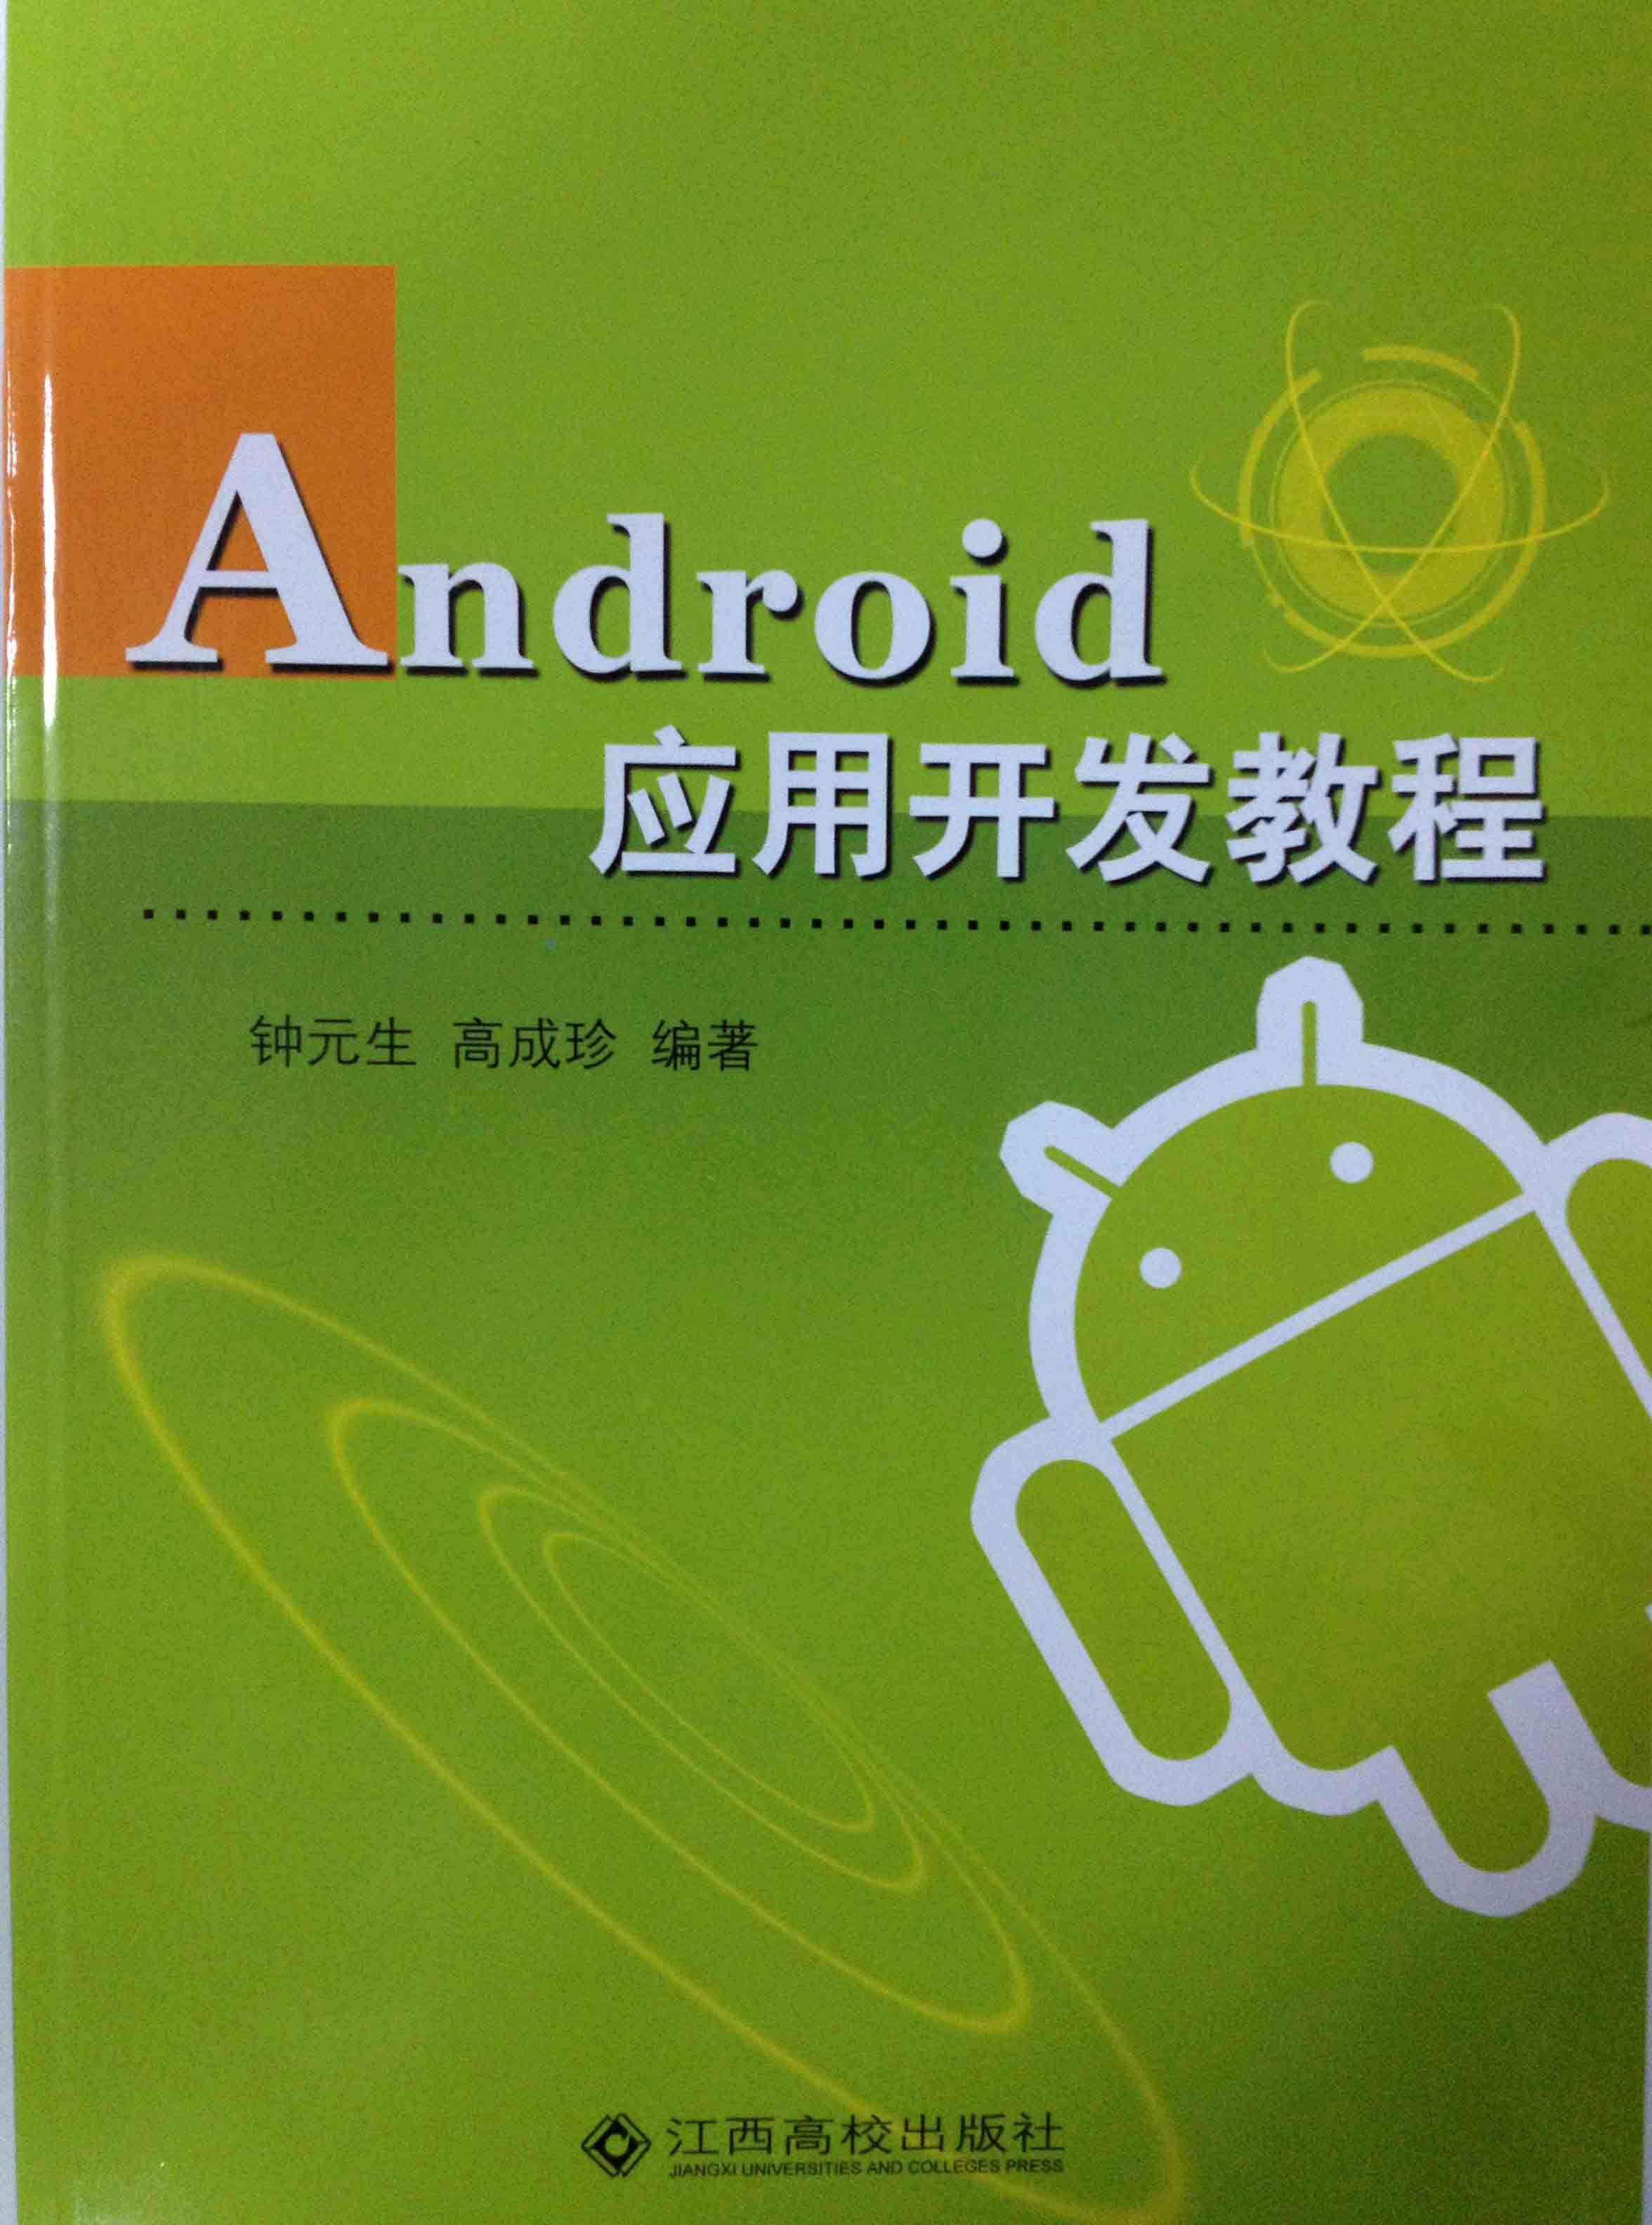 android001